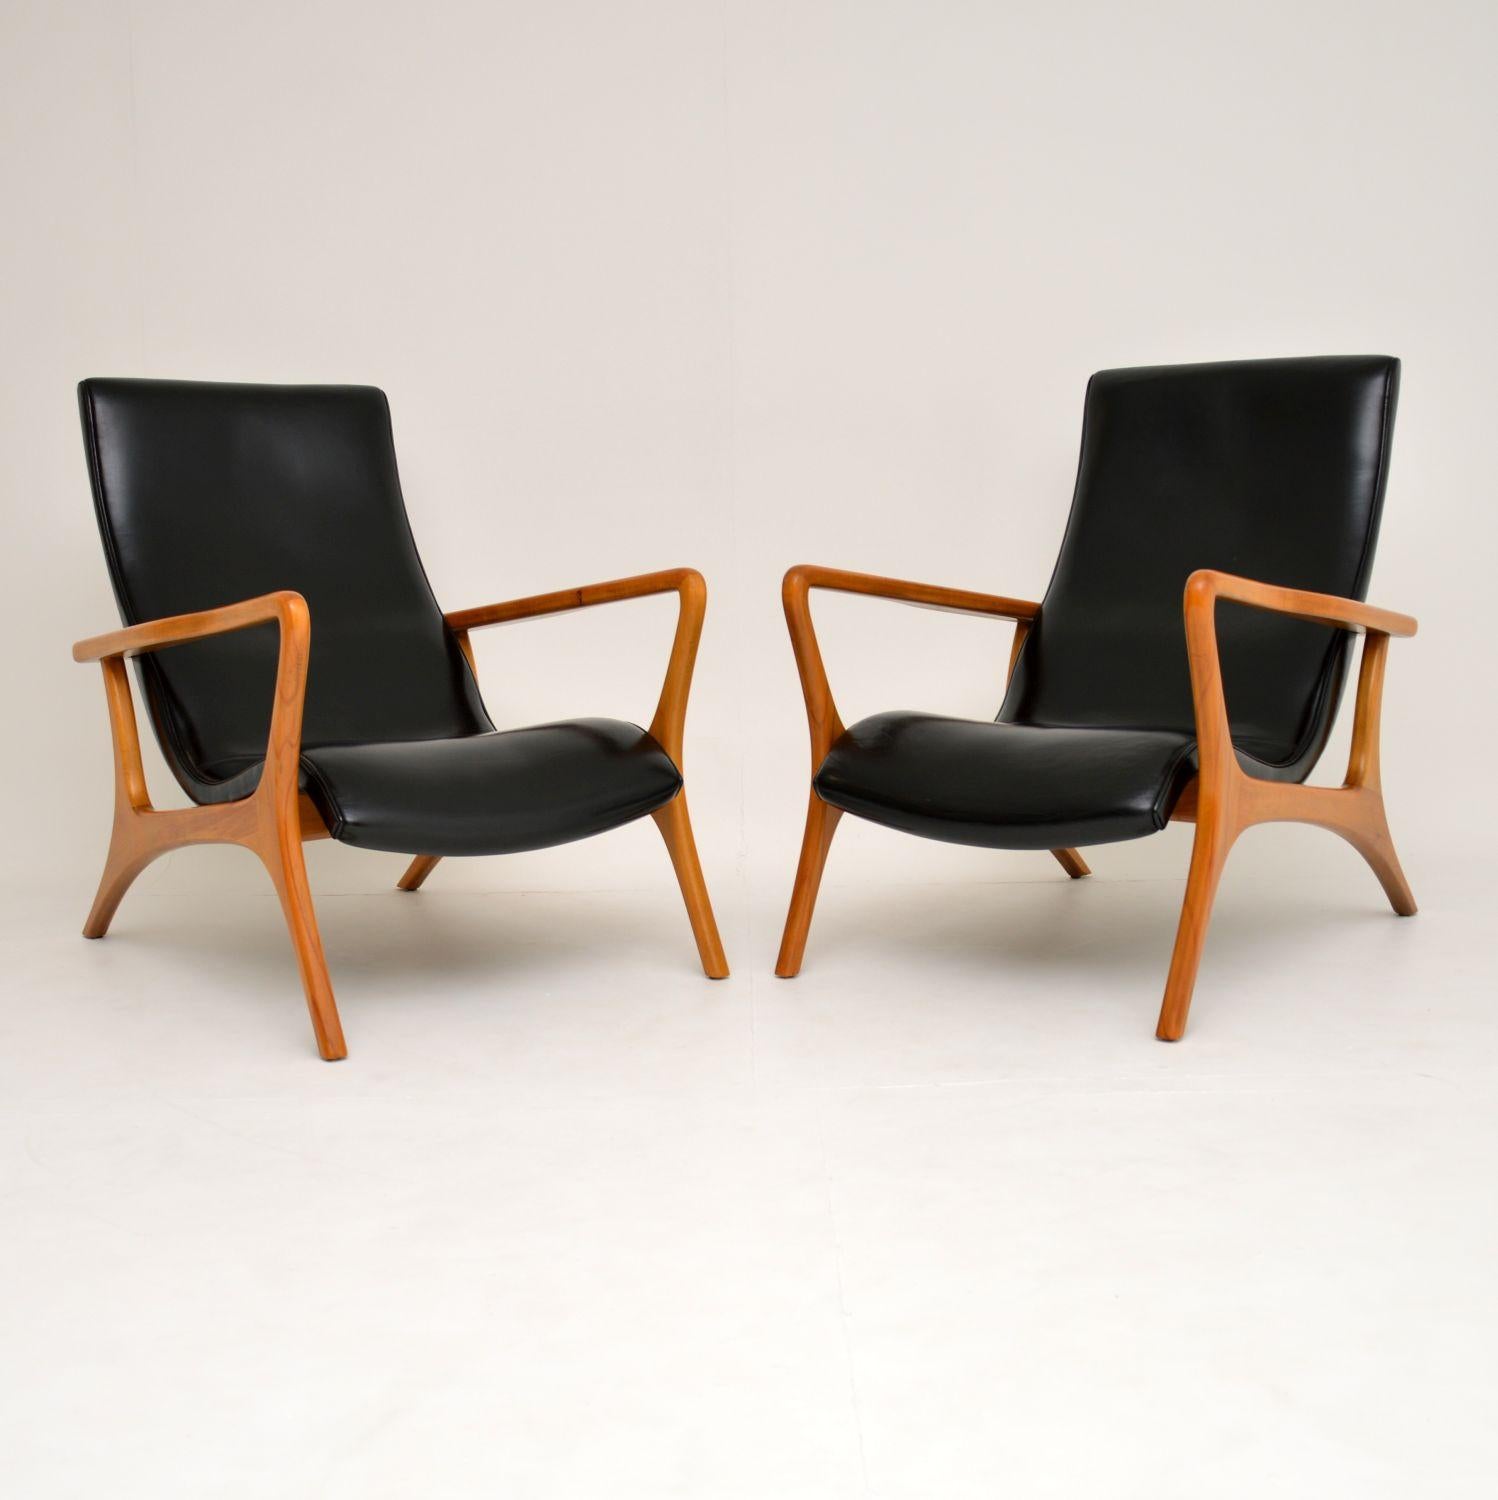 An amazing pair of vintage armchairs with an absolutely stunning design. They are highly influenced by Vladimir Kagan’s ‘Contour’ armchairs, though we are not sure who made these.

They are of amazing quality, with finely sculpted solid wood